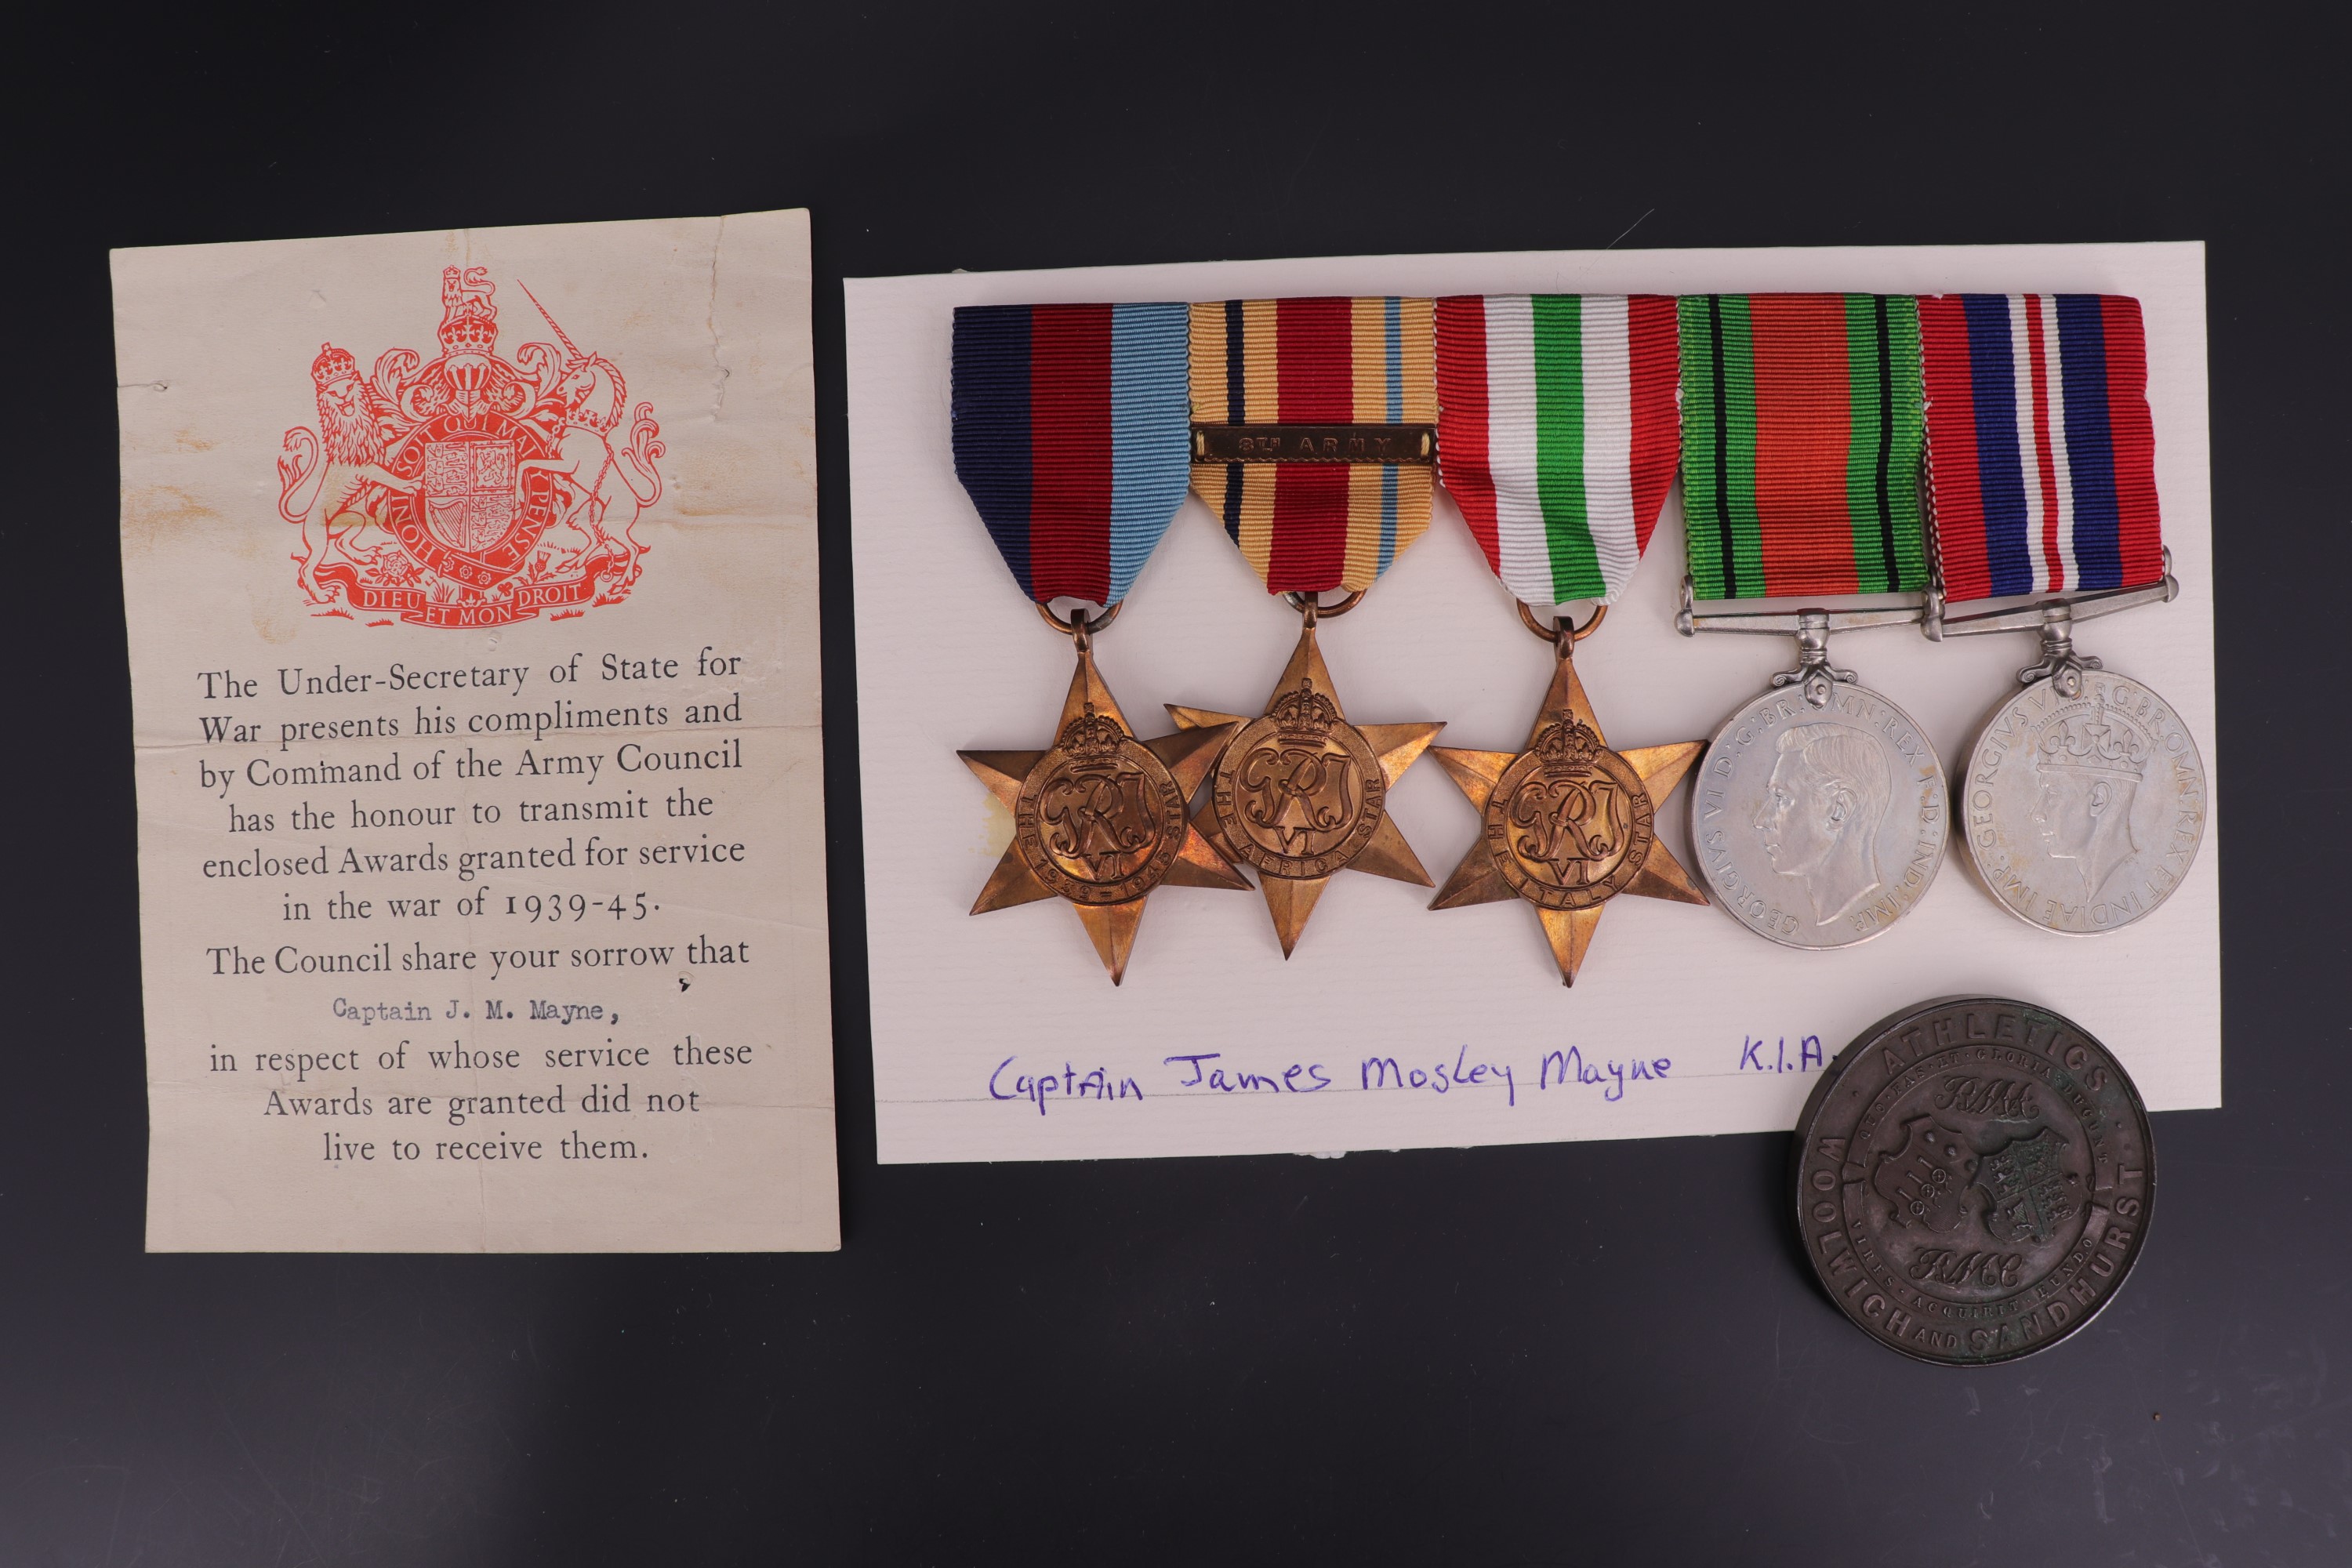 A Second World War group of casualty campaign medals, those of Captain James Mosley Mayne, Royal